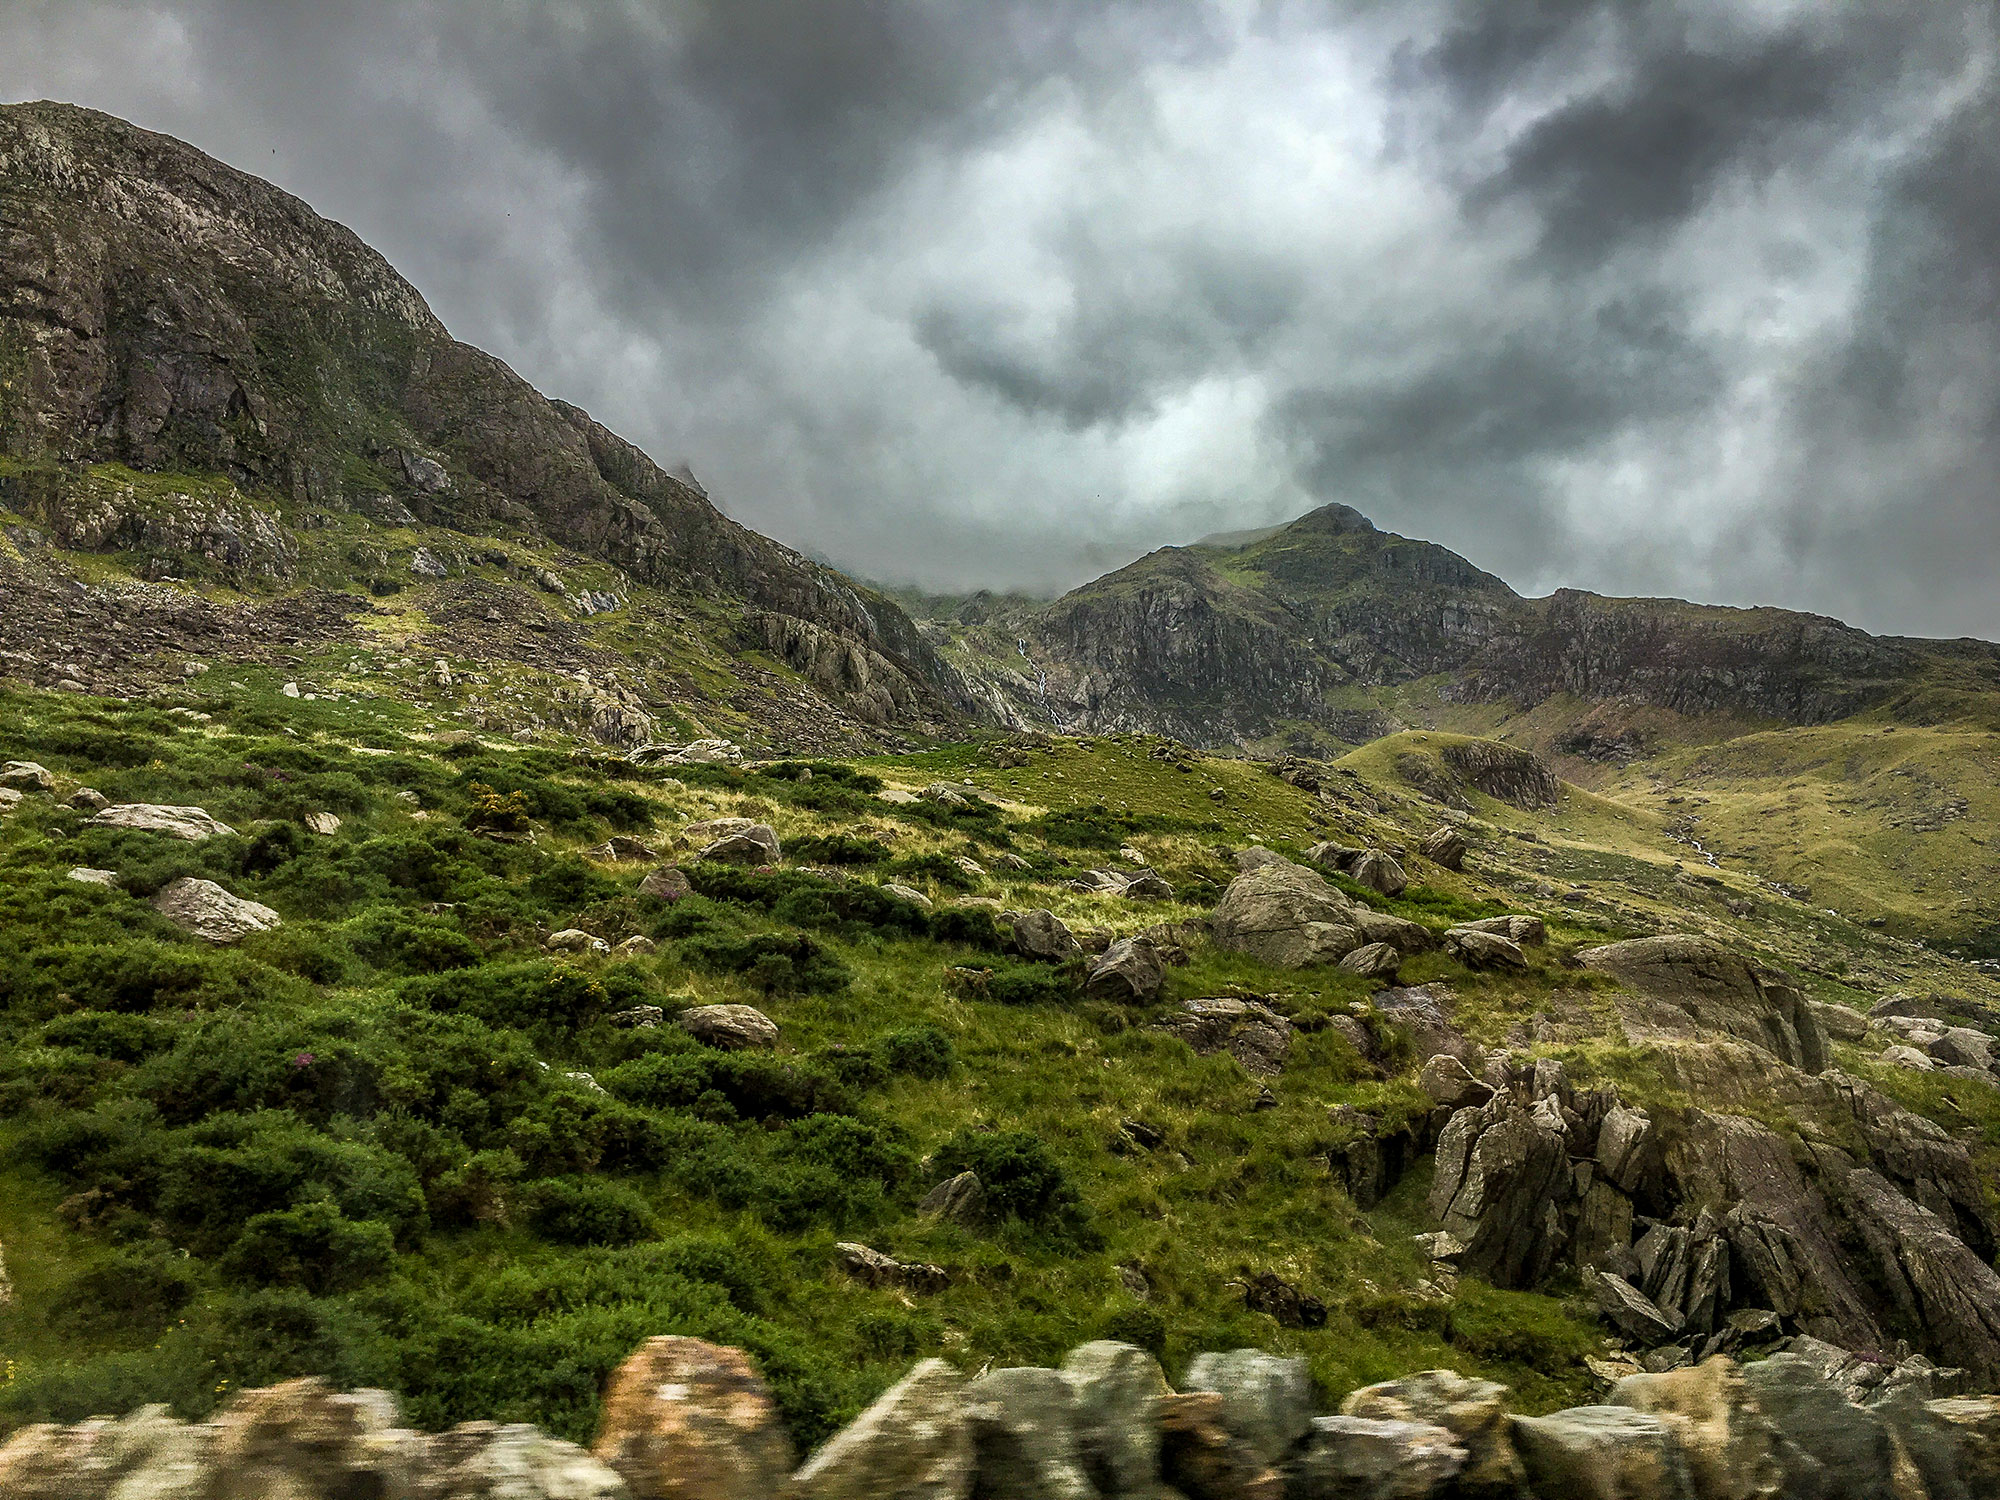 Mount Snowdon in Snowdonia National Park, Wales